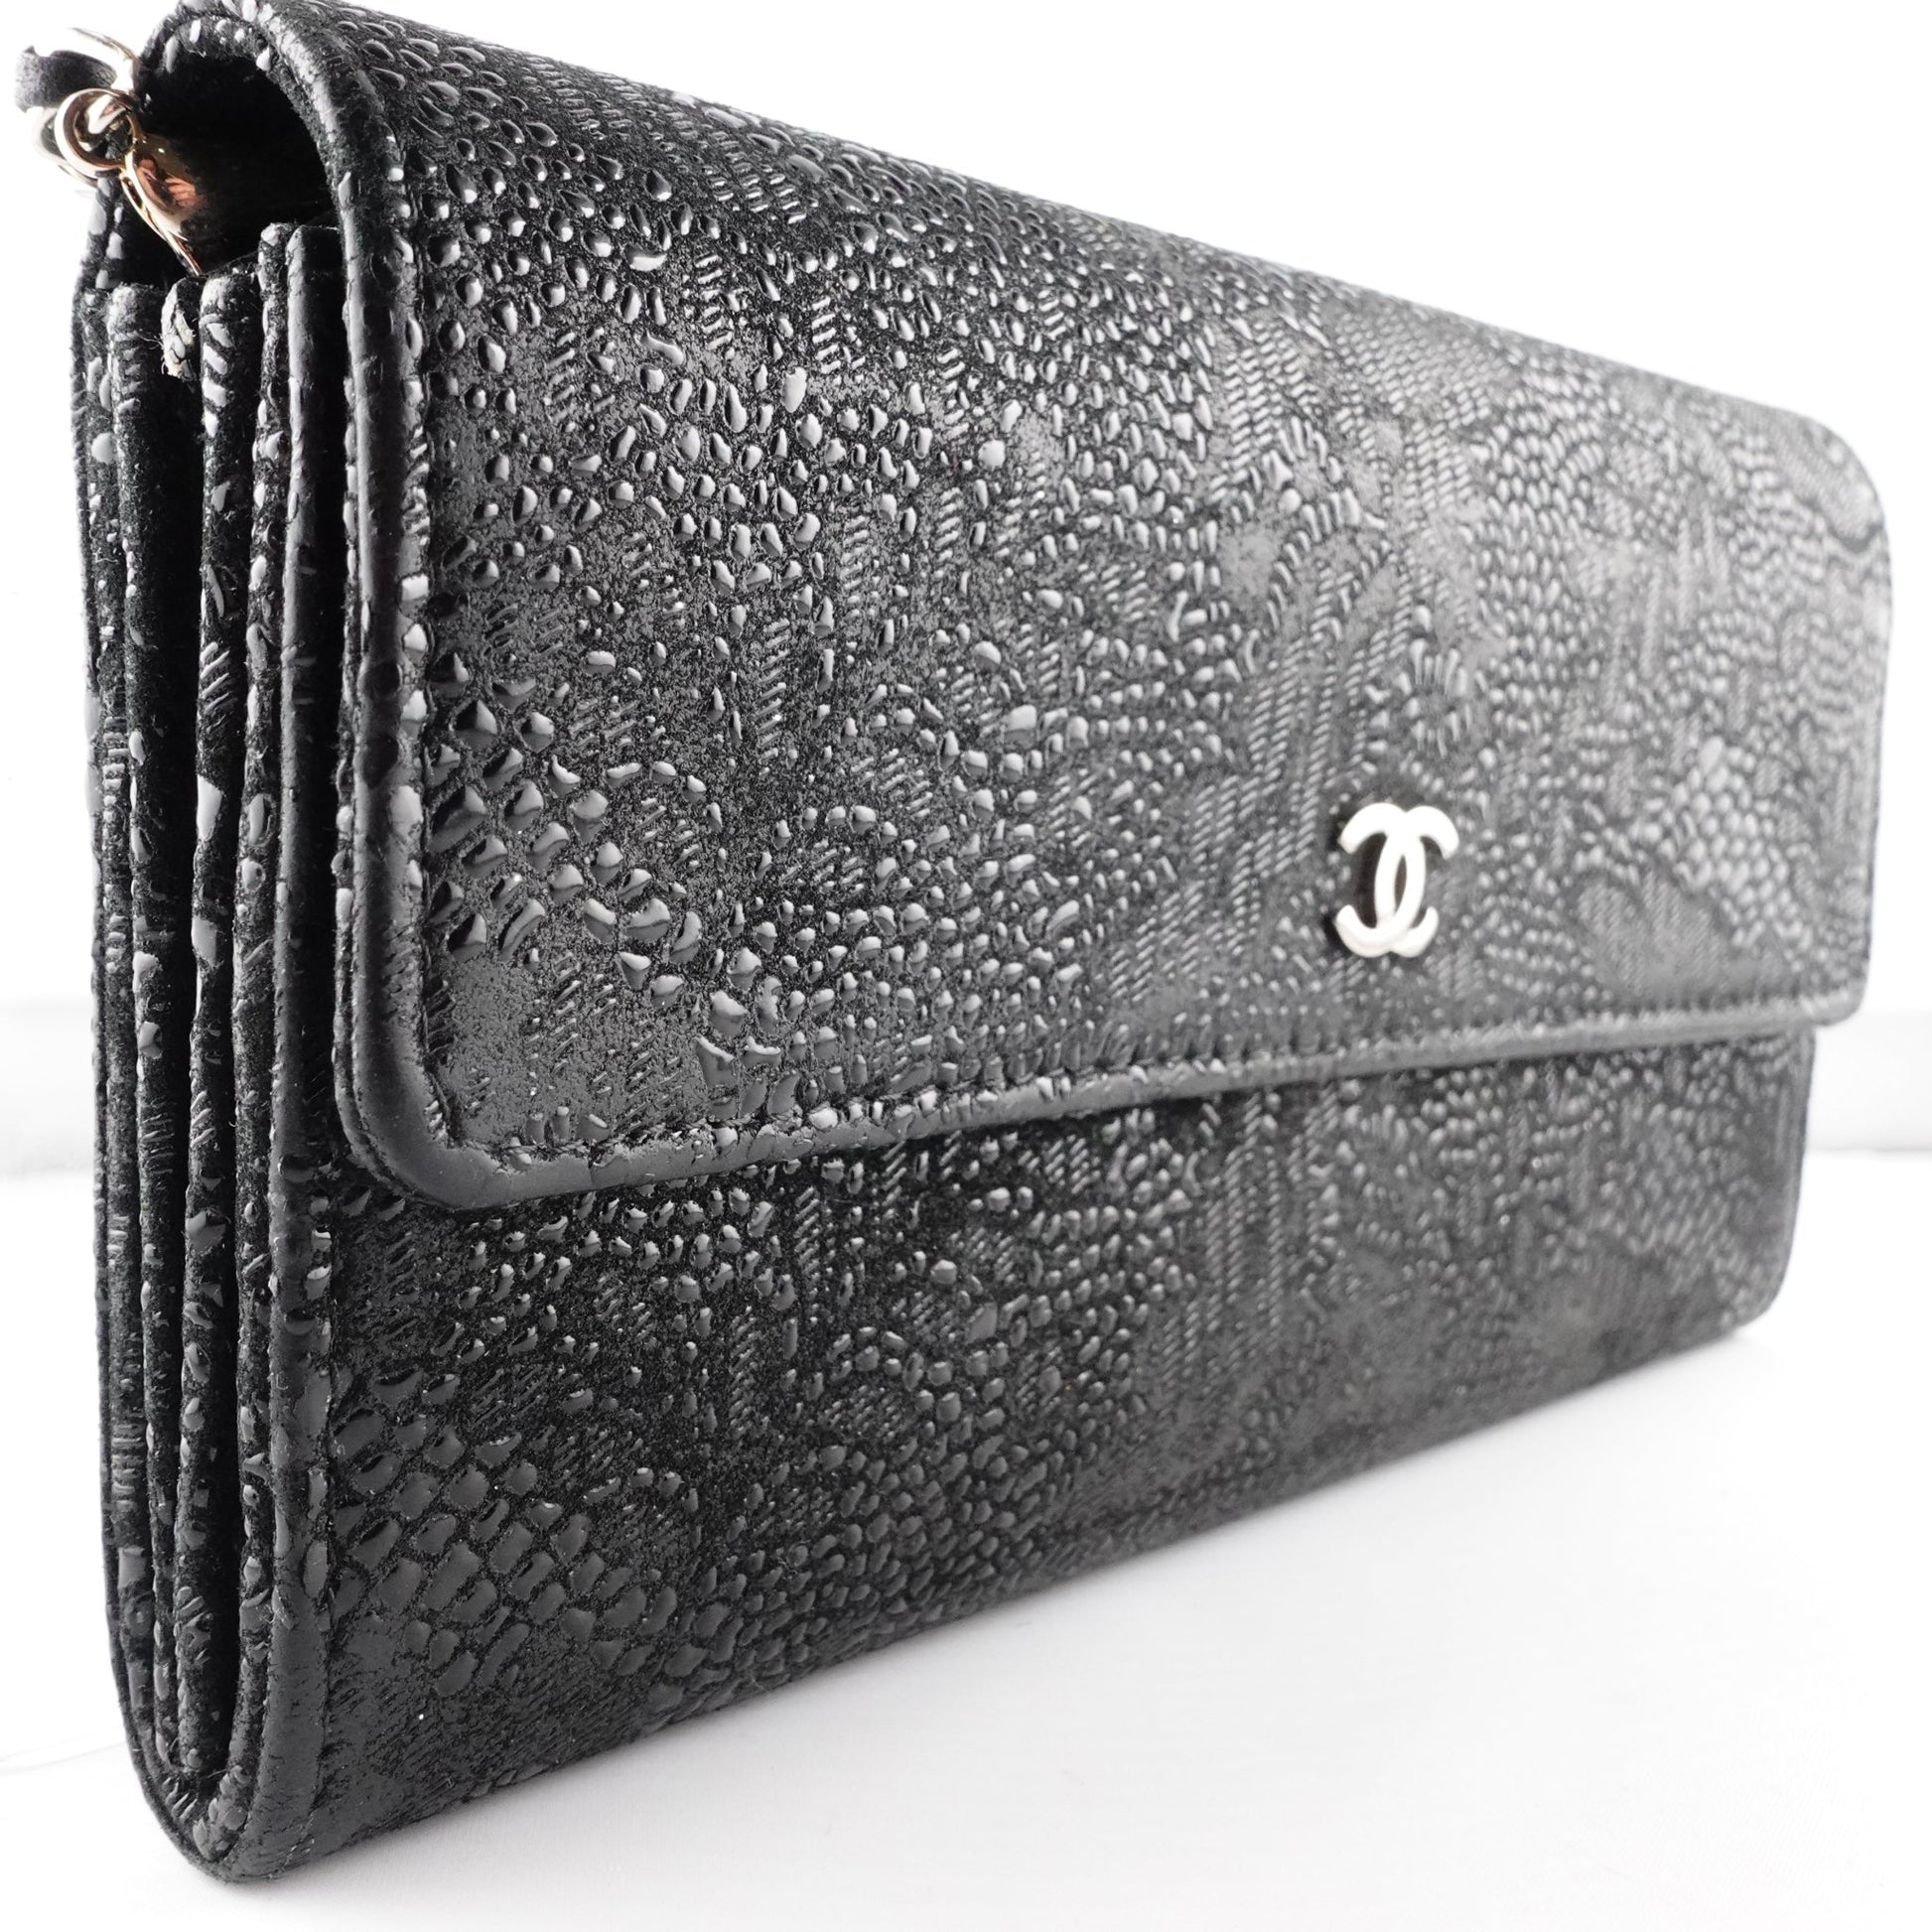 CHANEL Lace Goatskin Long Flap with Chain - Bag Envy